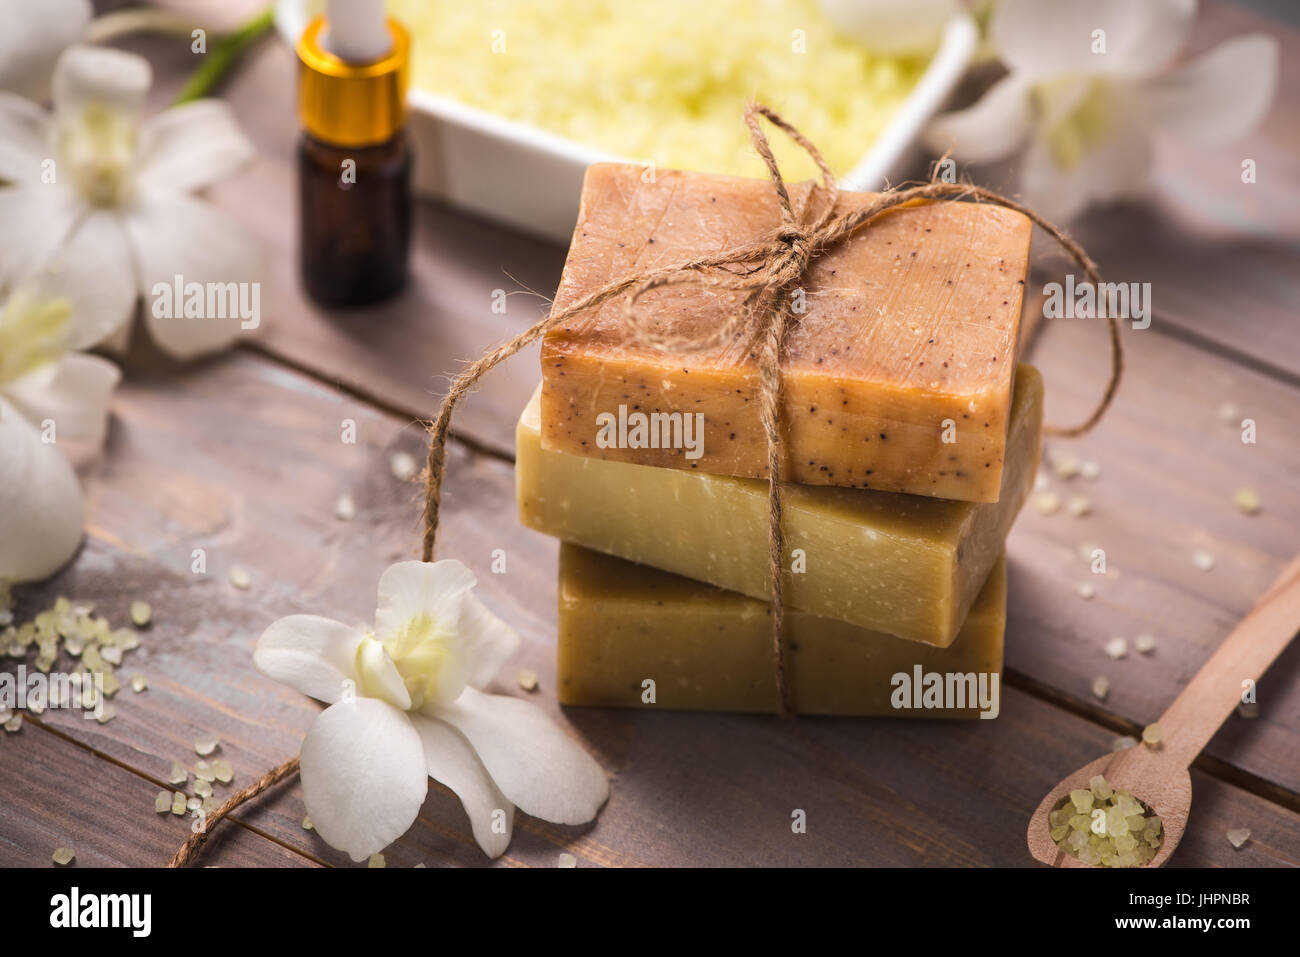 Handmade Soap with Flower branch. Spa products. Stock Photo